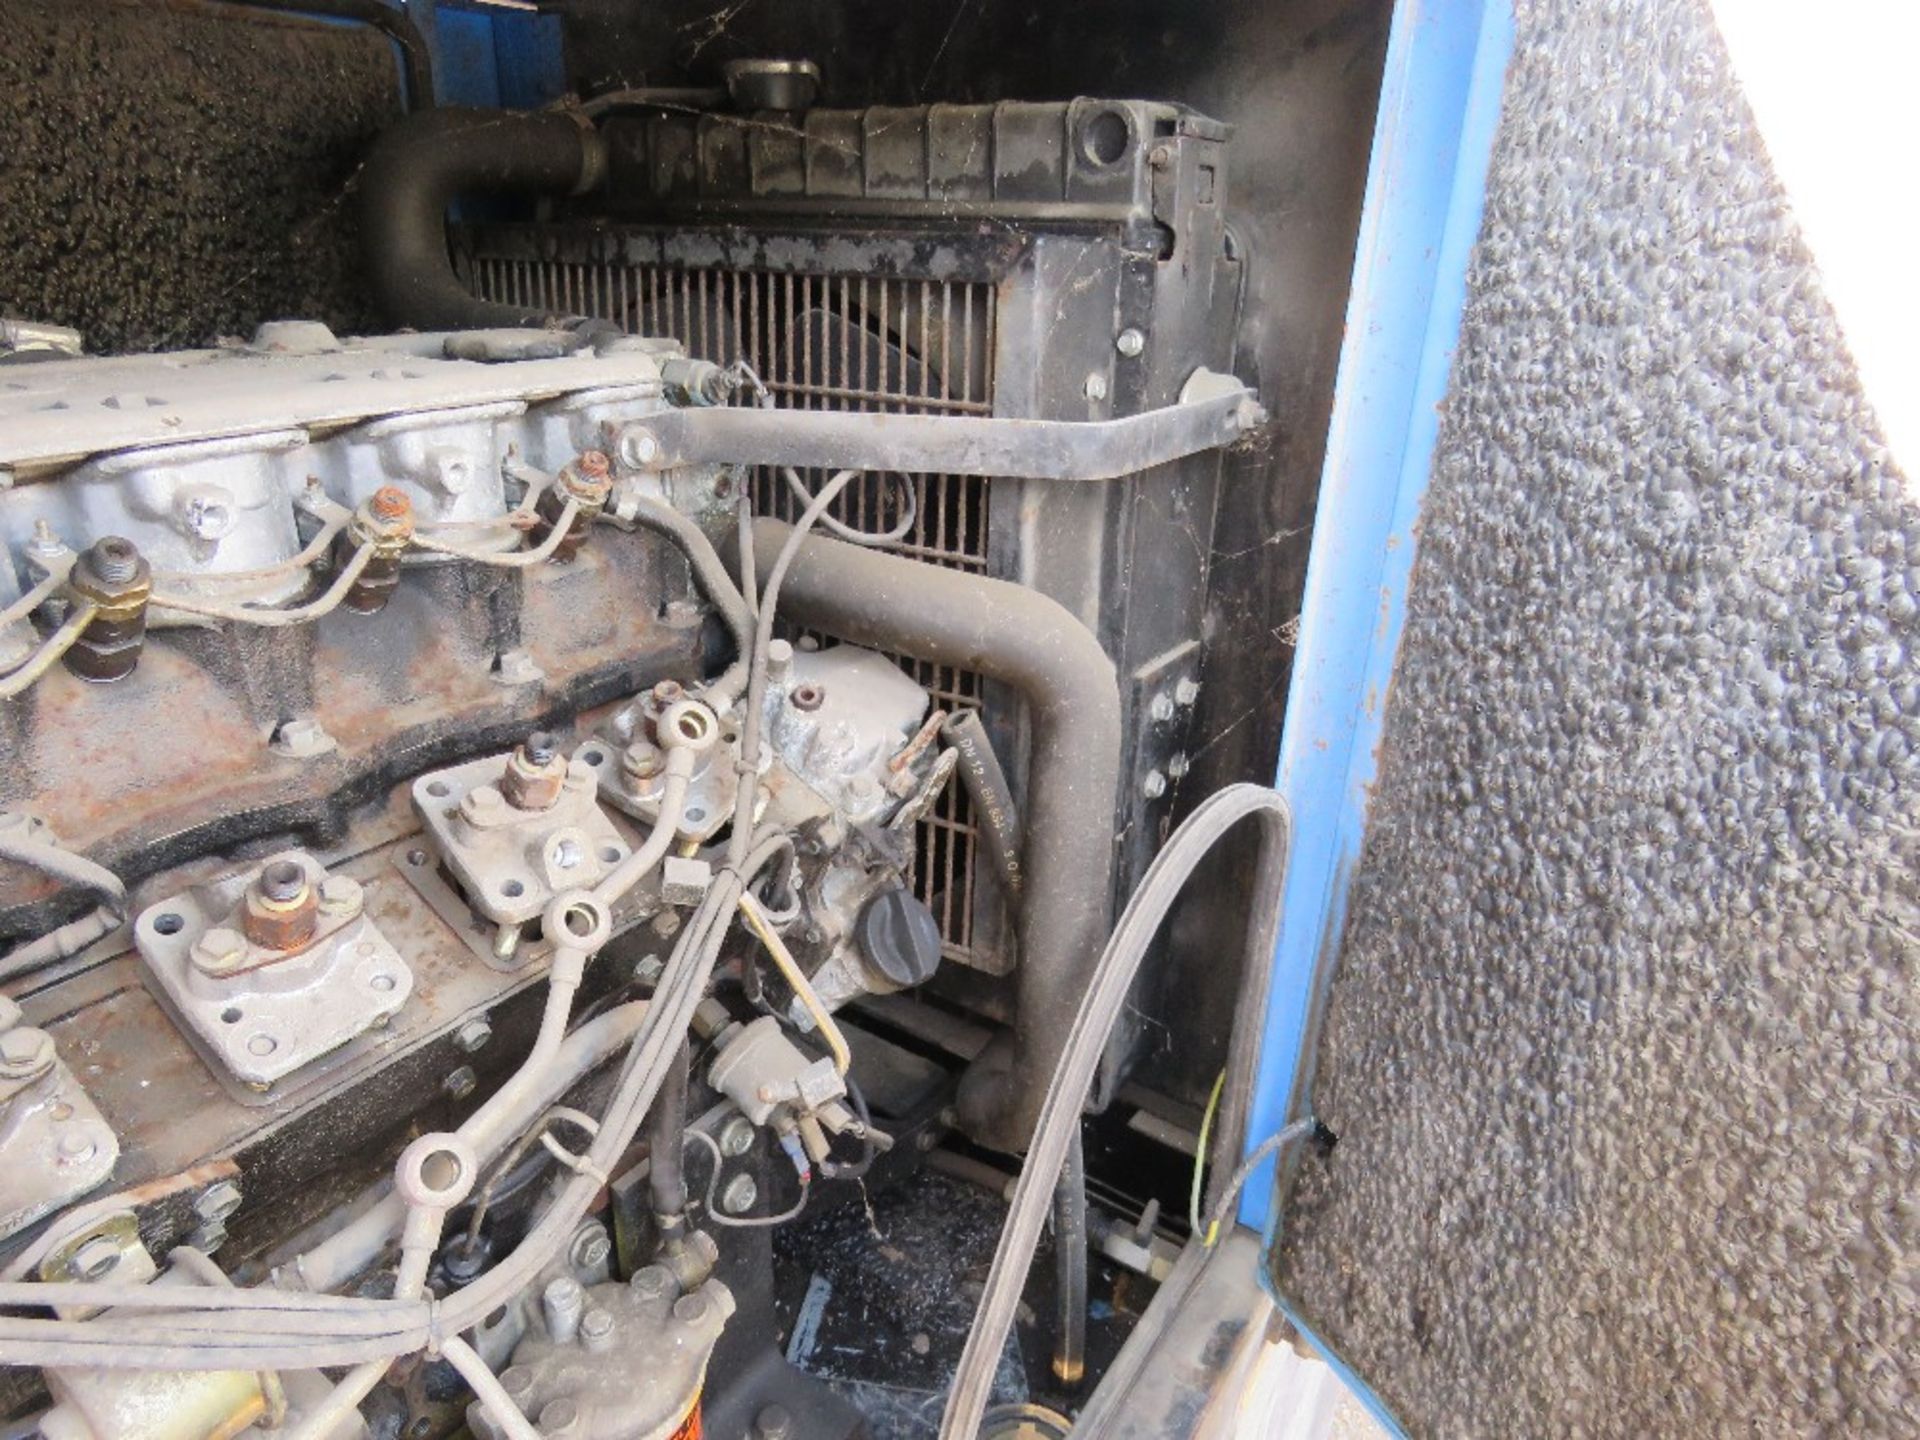 STEPHILL SSDX20 GENERATOR SET, ISUZU ENGINE, PARTS MISSING, SPARES/REPAIR. THIS LOT IS SOLD UNDER T - Image 8 of 8